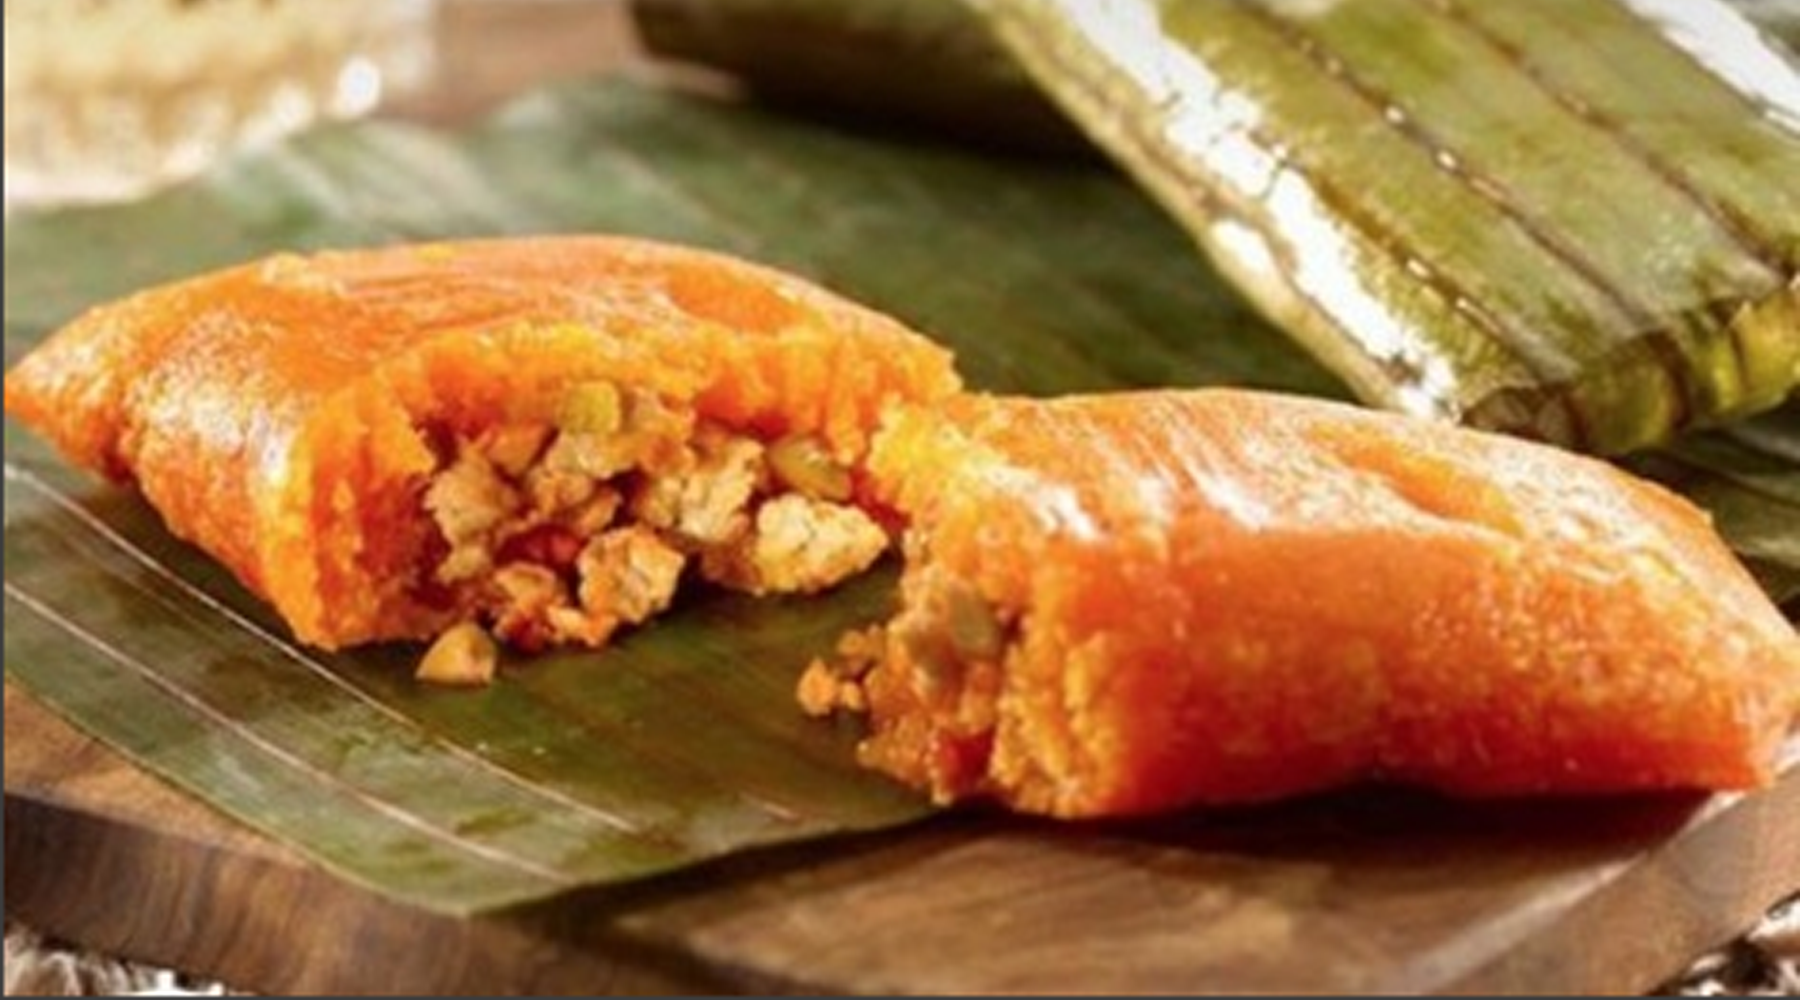 Pasteles: A Puerto Rican Christmas Tale - Project Eñye